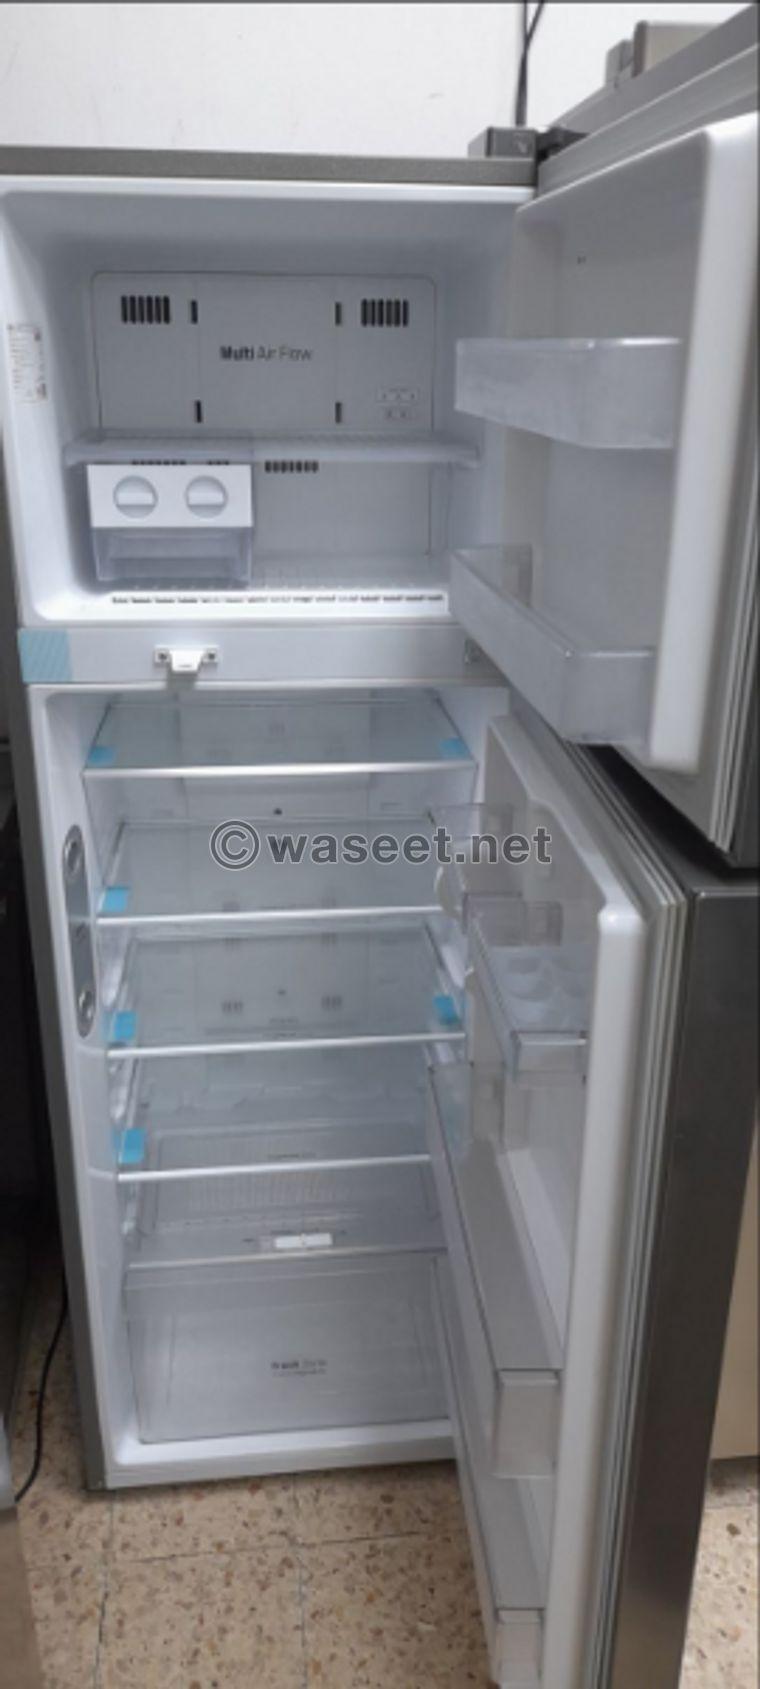 LG FRIDGE ALMOST NEW FOR SALE 2